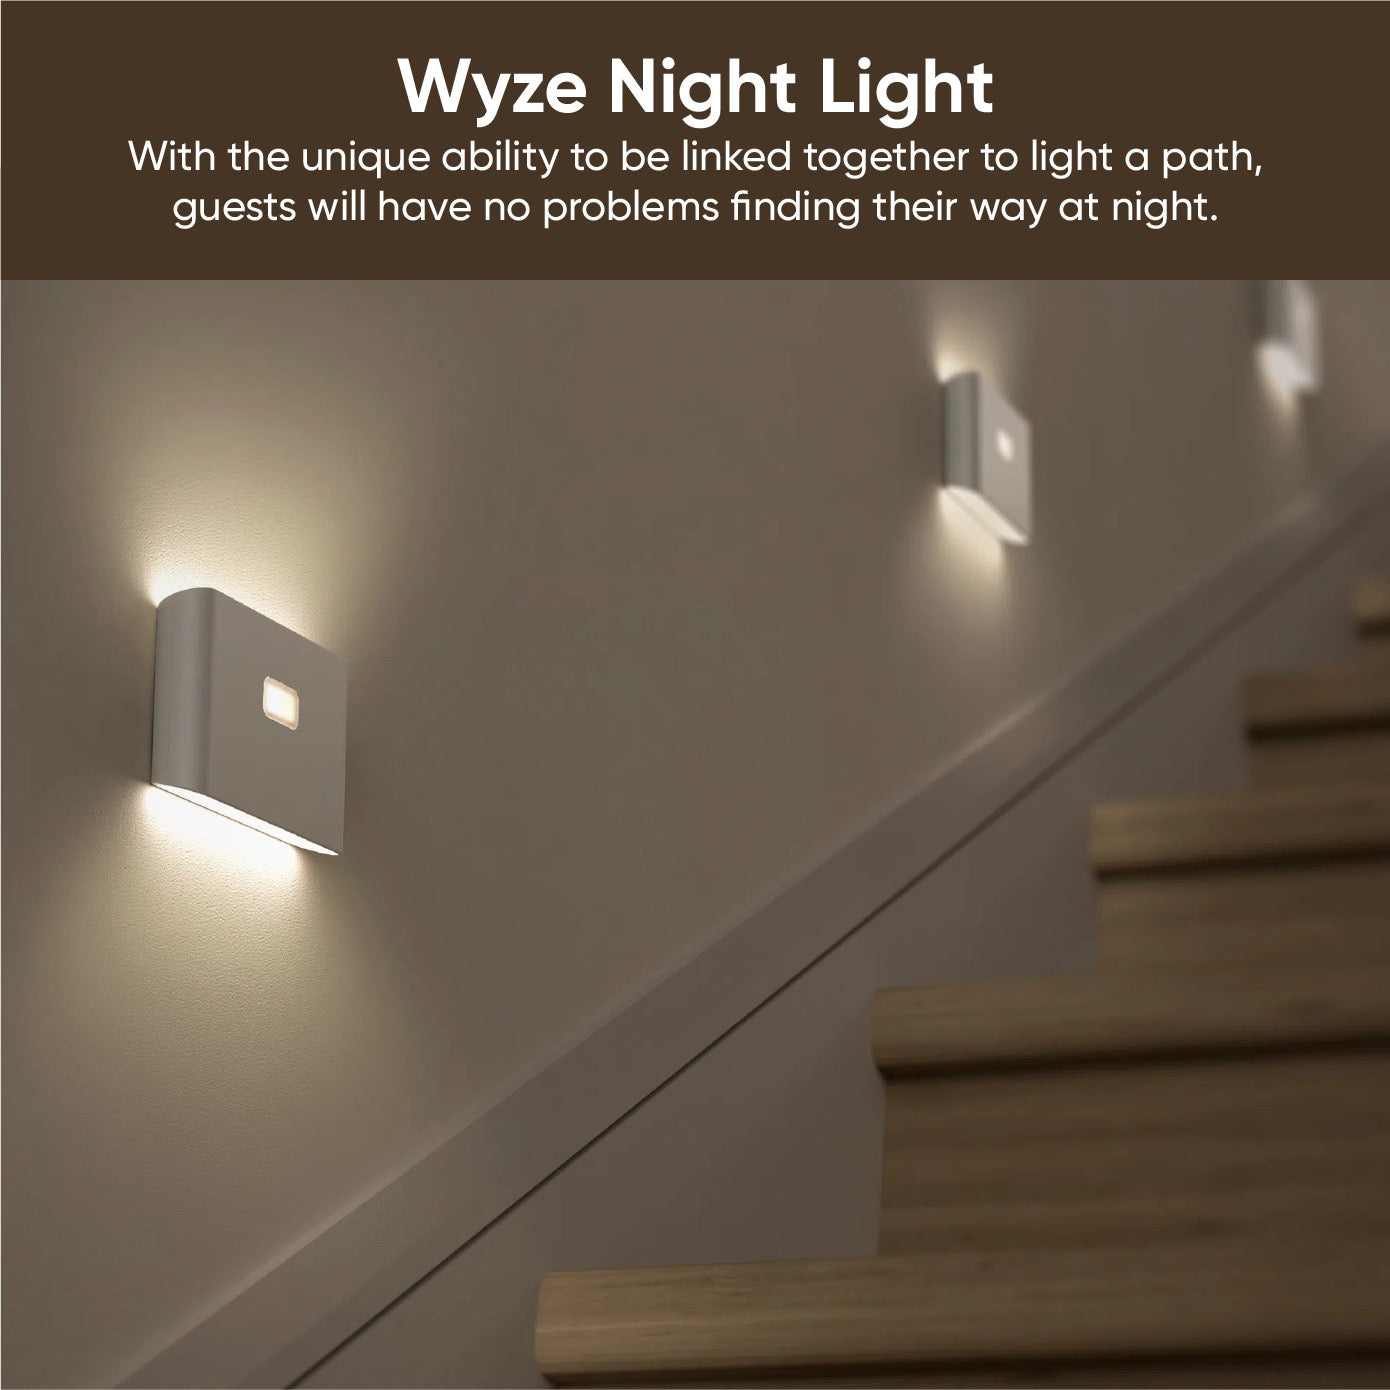 Wyze Night Lights lining the side of stairs.